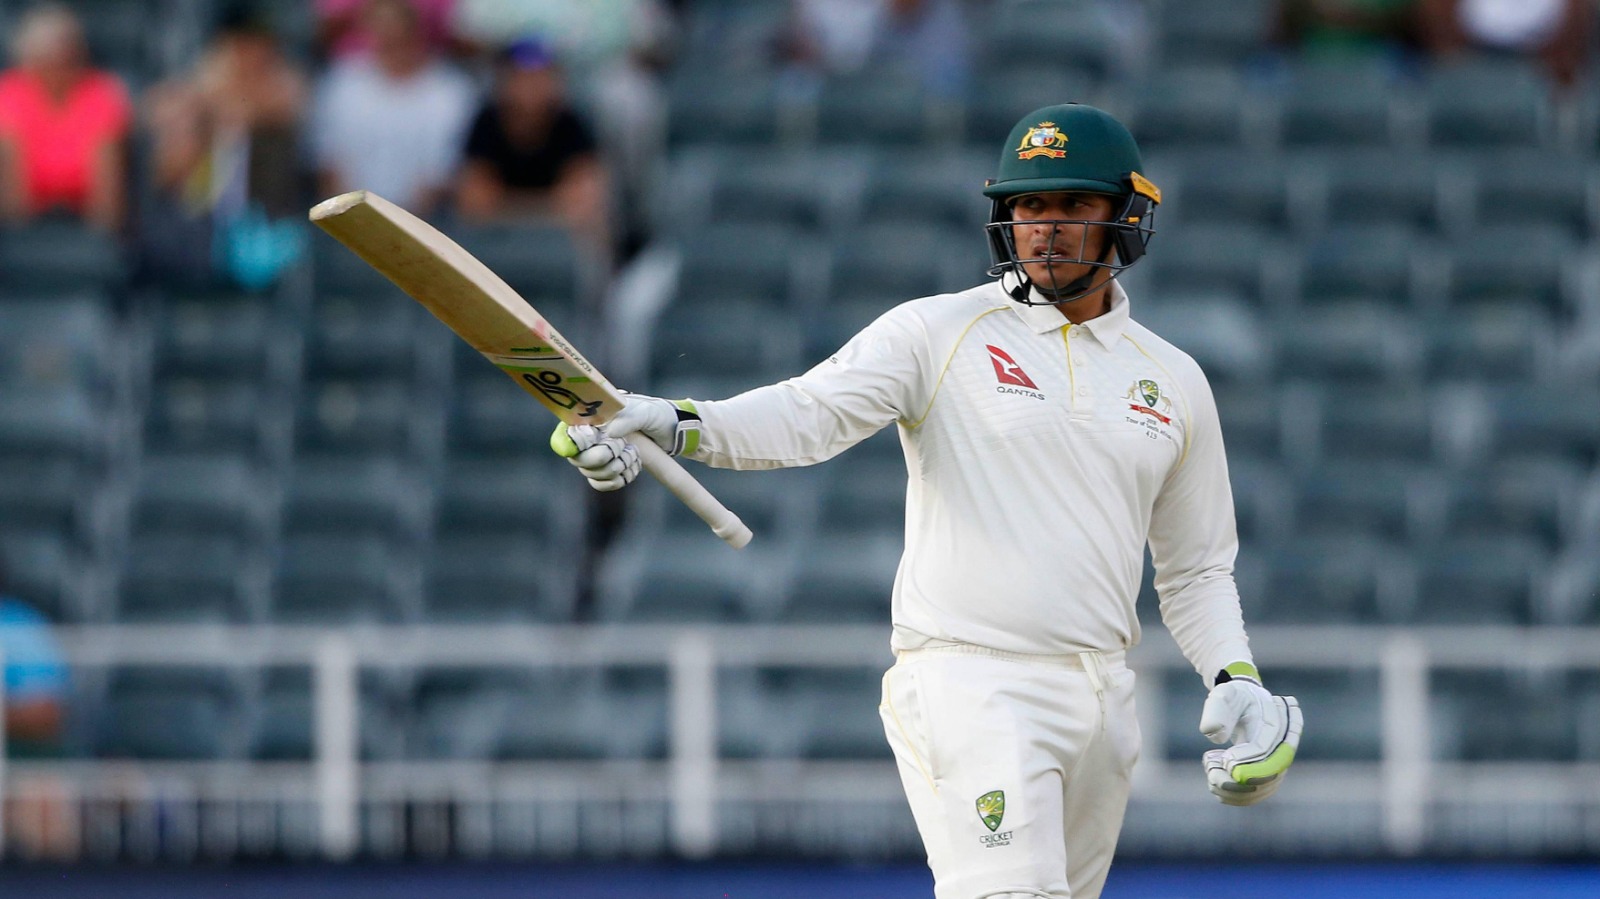 IND vs AUS LIVE: Usman Khawaja pumped up by 'era-defining' six months for Australian Test team as Aussies get ready for India Tour, WTC & Ashes challenge, Follow LIVE